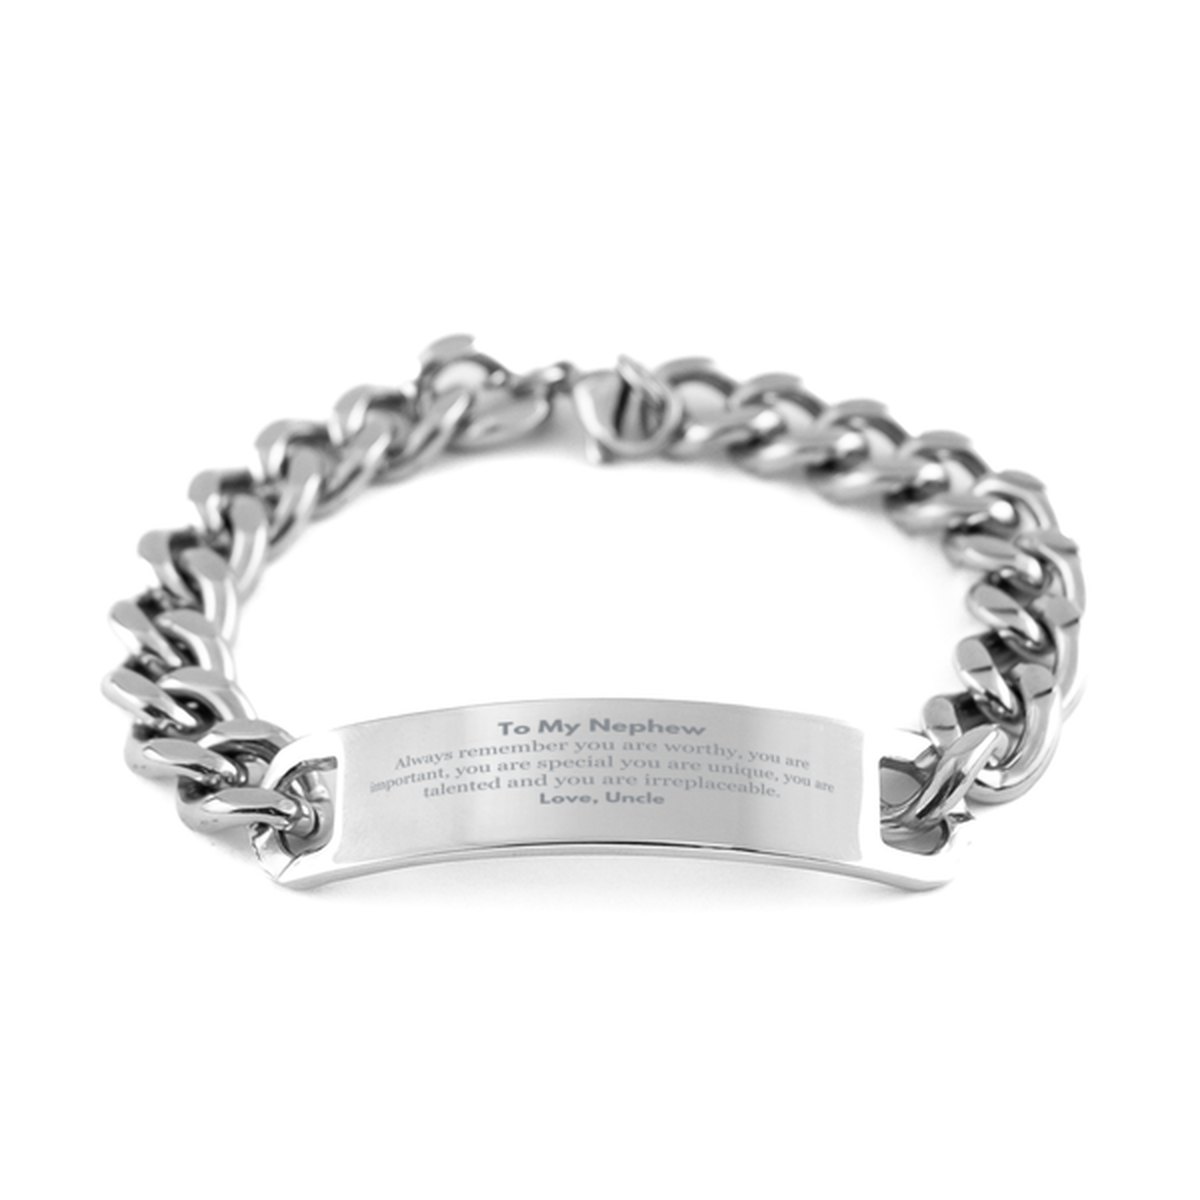 Nephew Birthday Gifts from Uncle, Inspirational Cuban Chain Stainless Steel Bracelet for Nephew Christmas Graduation Gifts for Nephew Always remember you are worthy, you are important. Love, Uncle